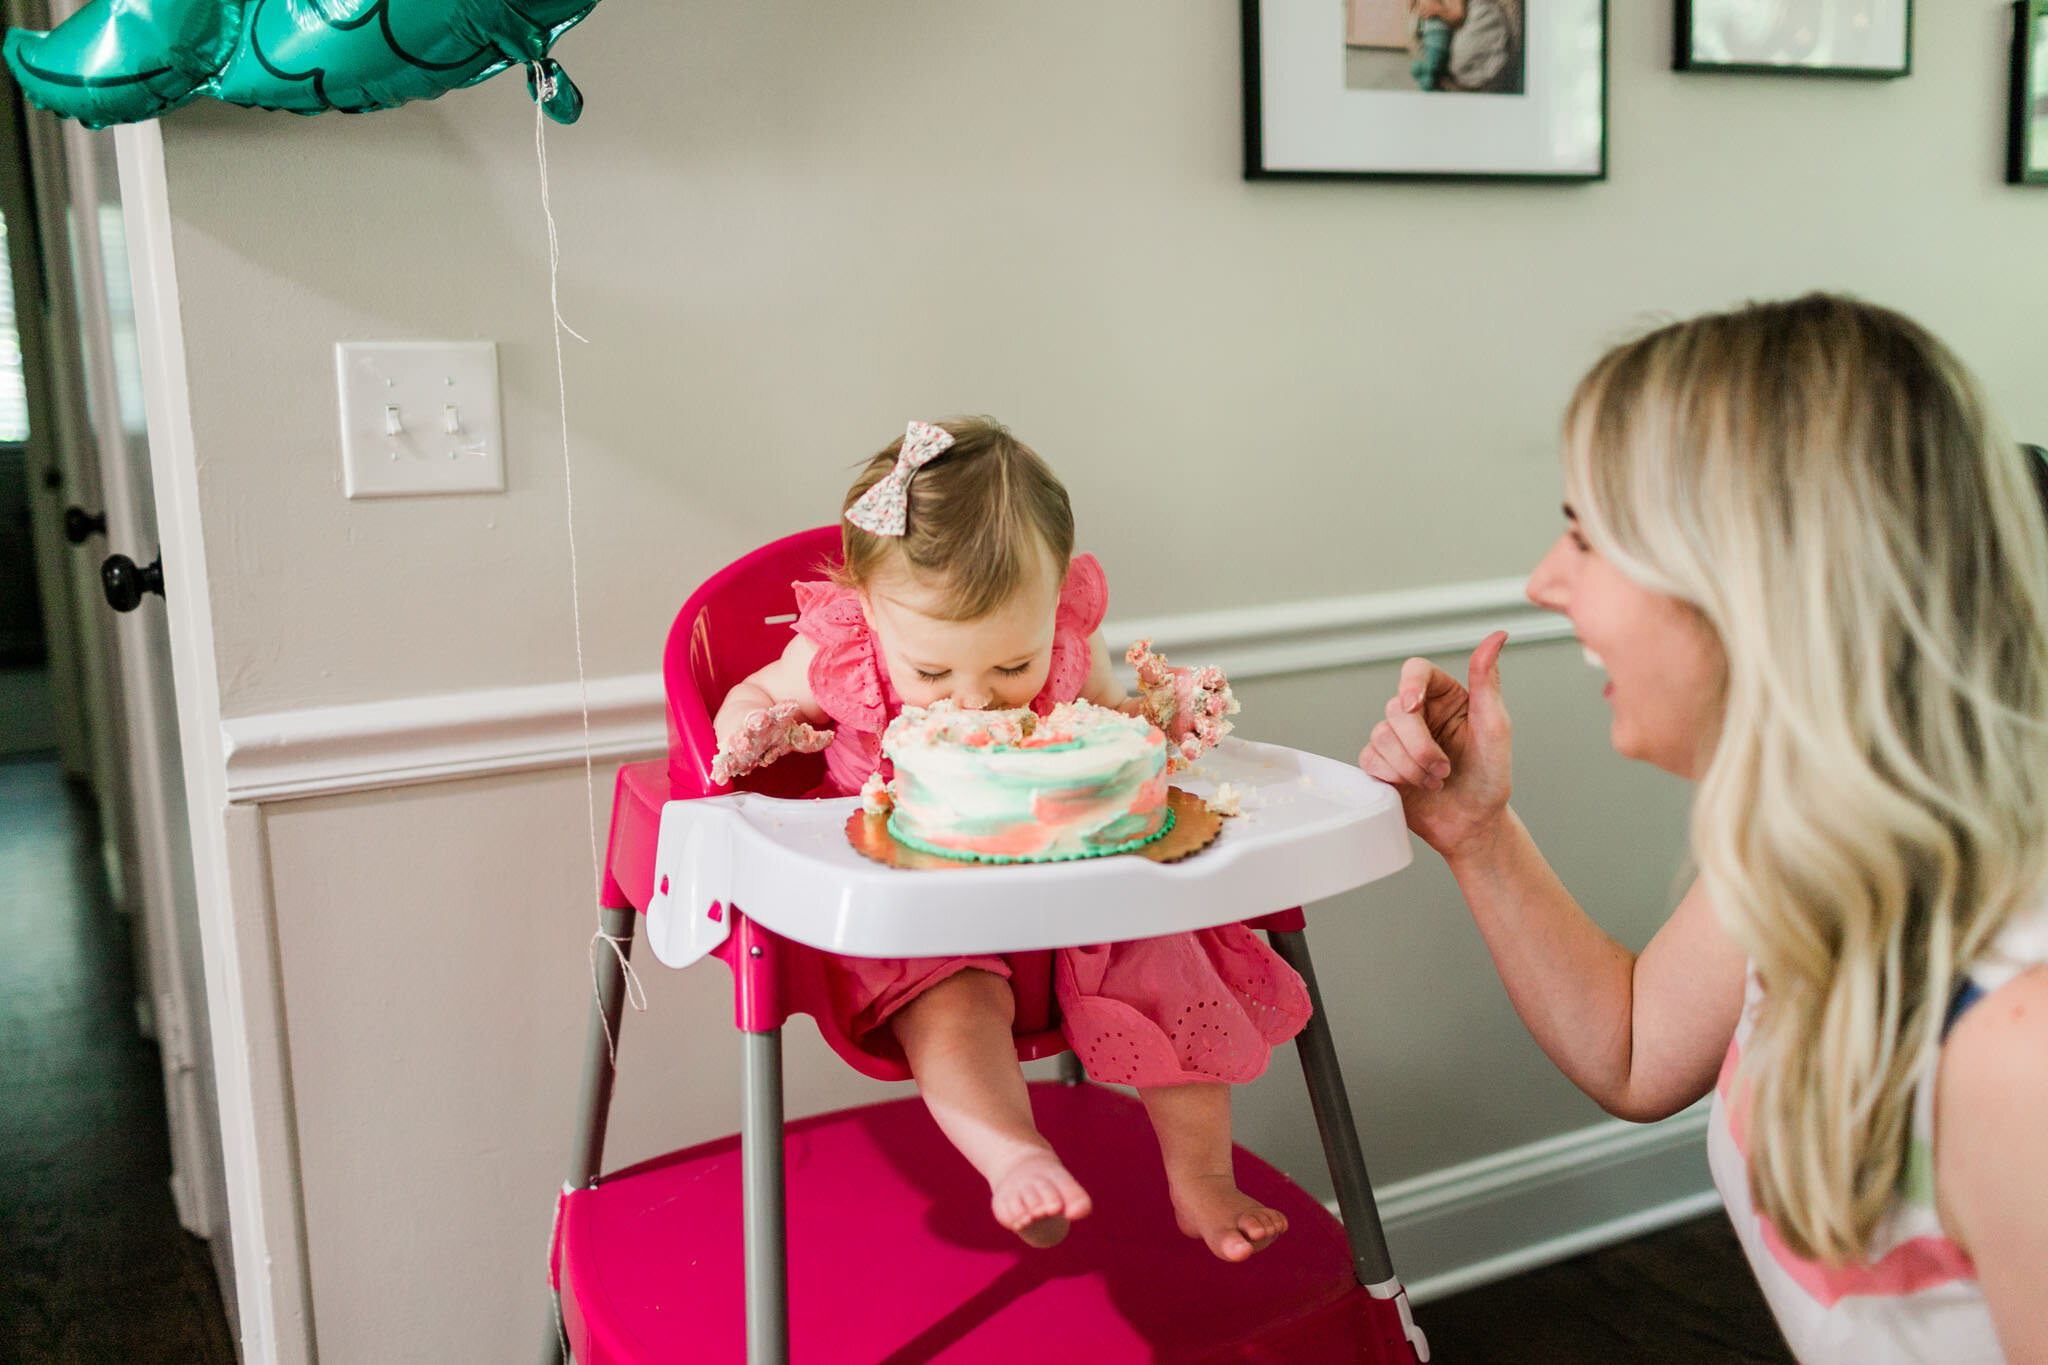 Raleigh Family Photographer | By G. Lin Photography | First birthday cake smash